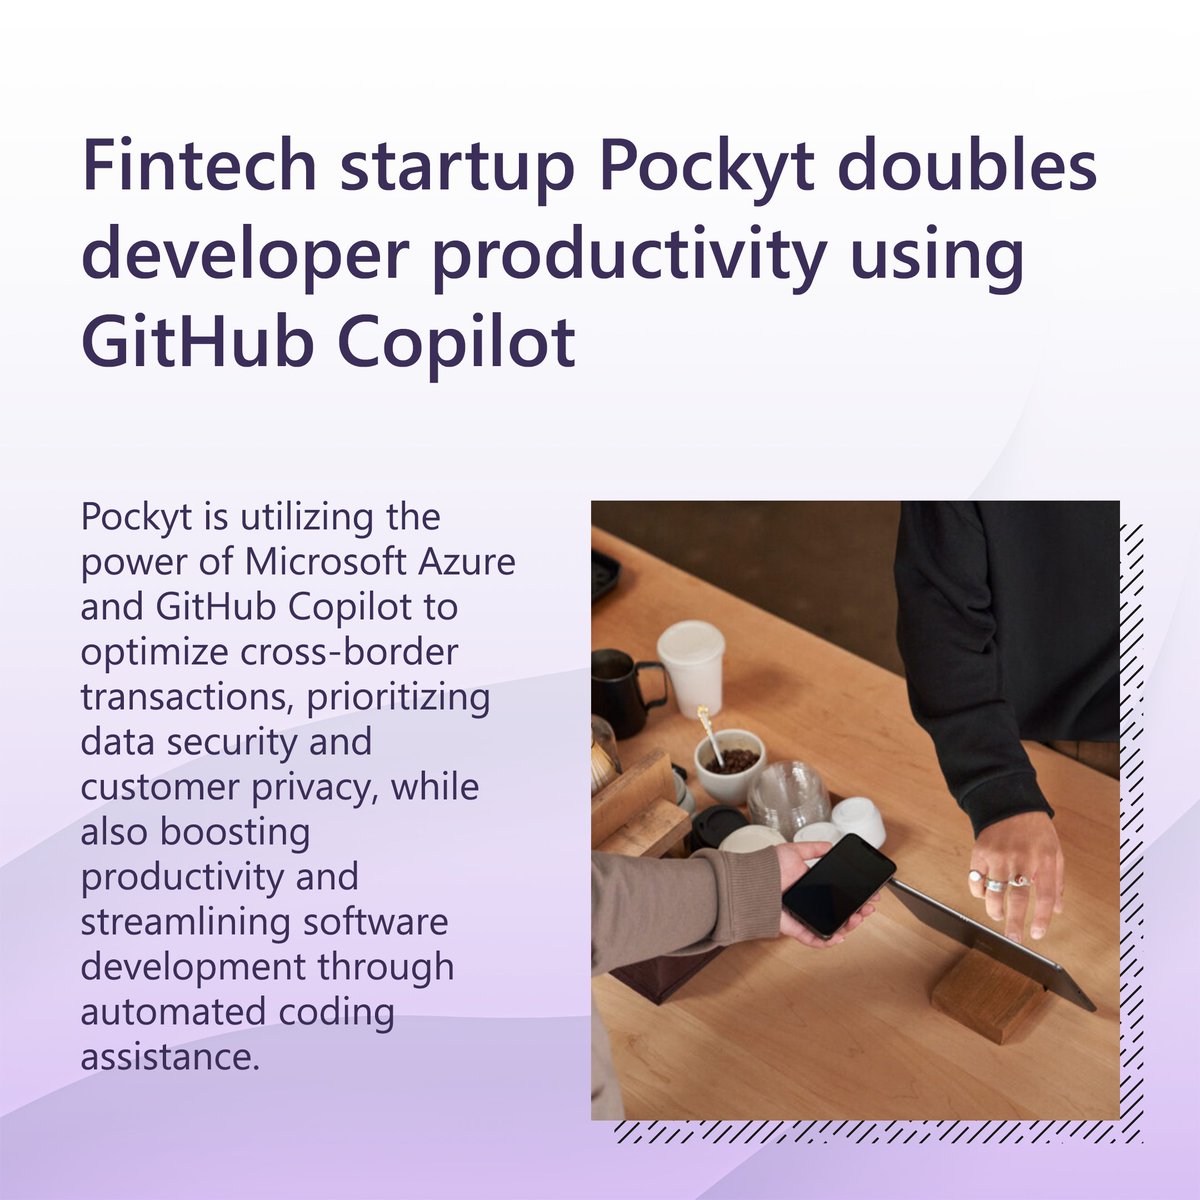 Code smarter, not harder!💡 @pockytio's developers improved developer productivity by more than 100% with GitHub Copilot, reducing integration time and boosting efficiency. Learn how they did it: msft.it/6011YPzXR